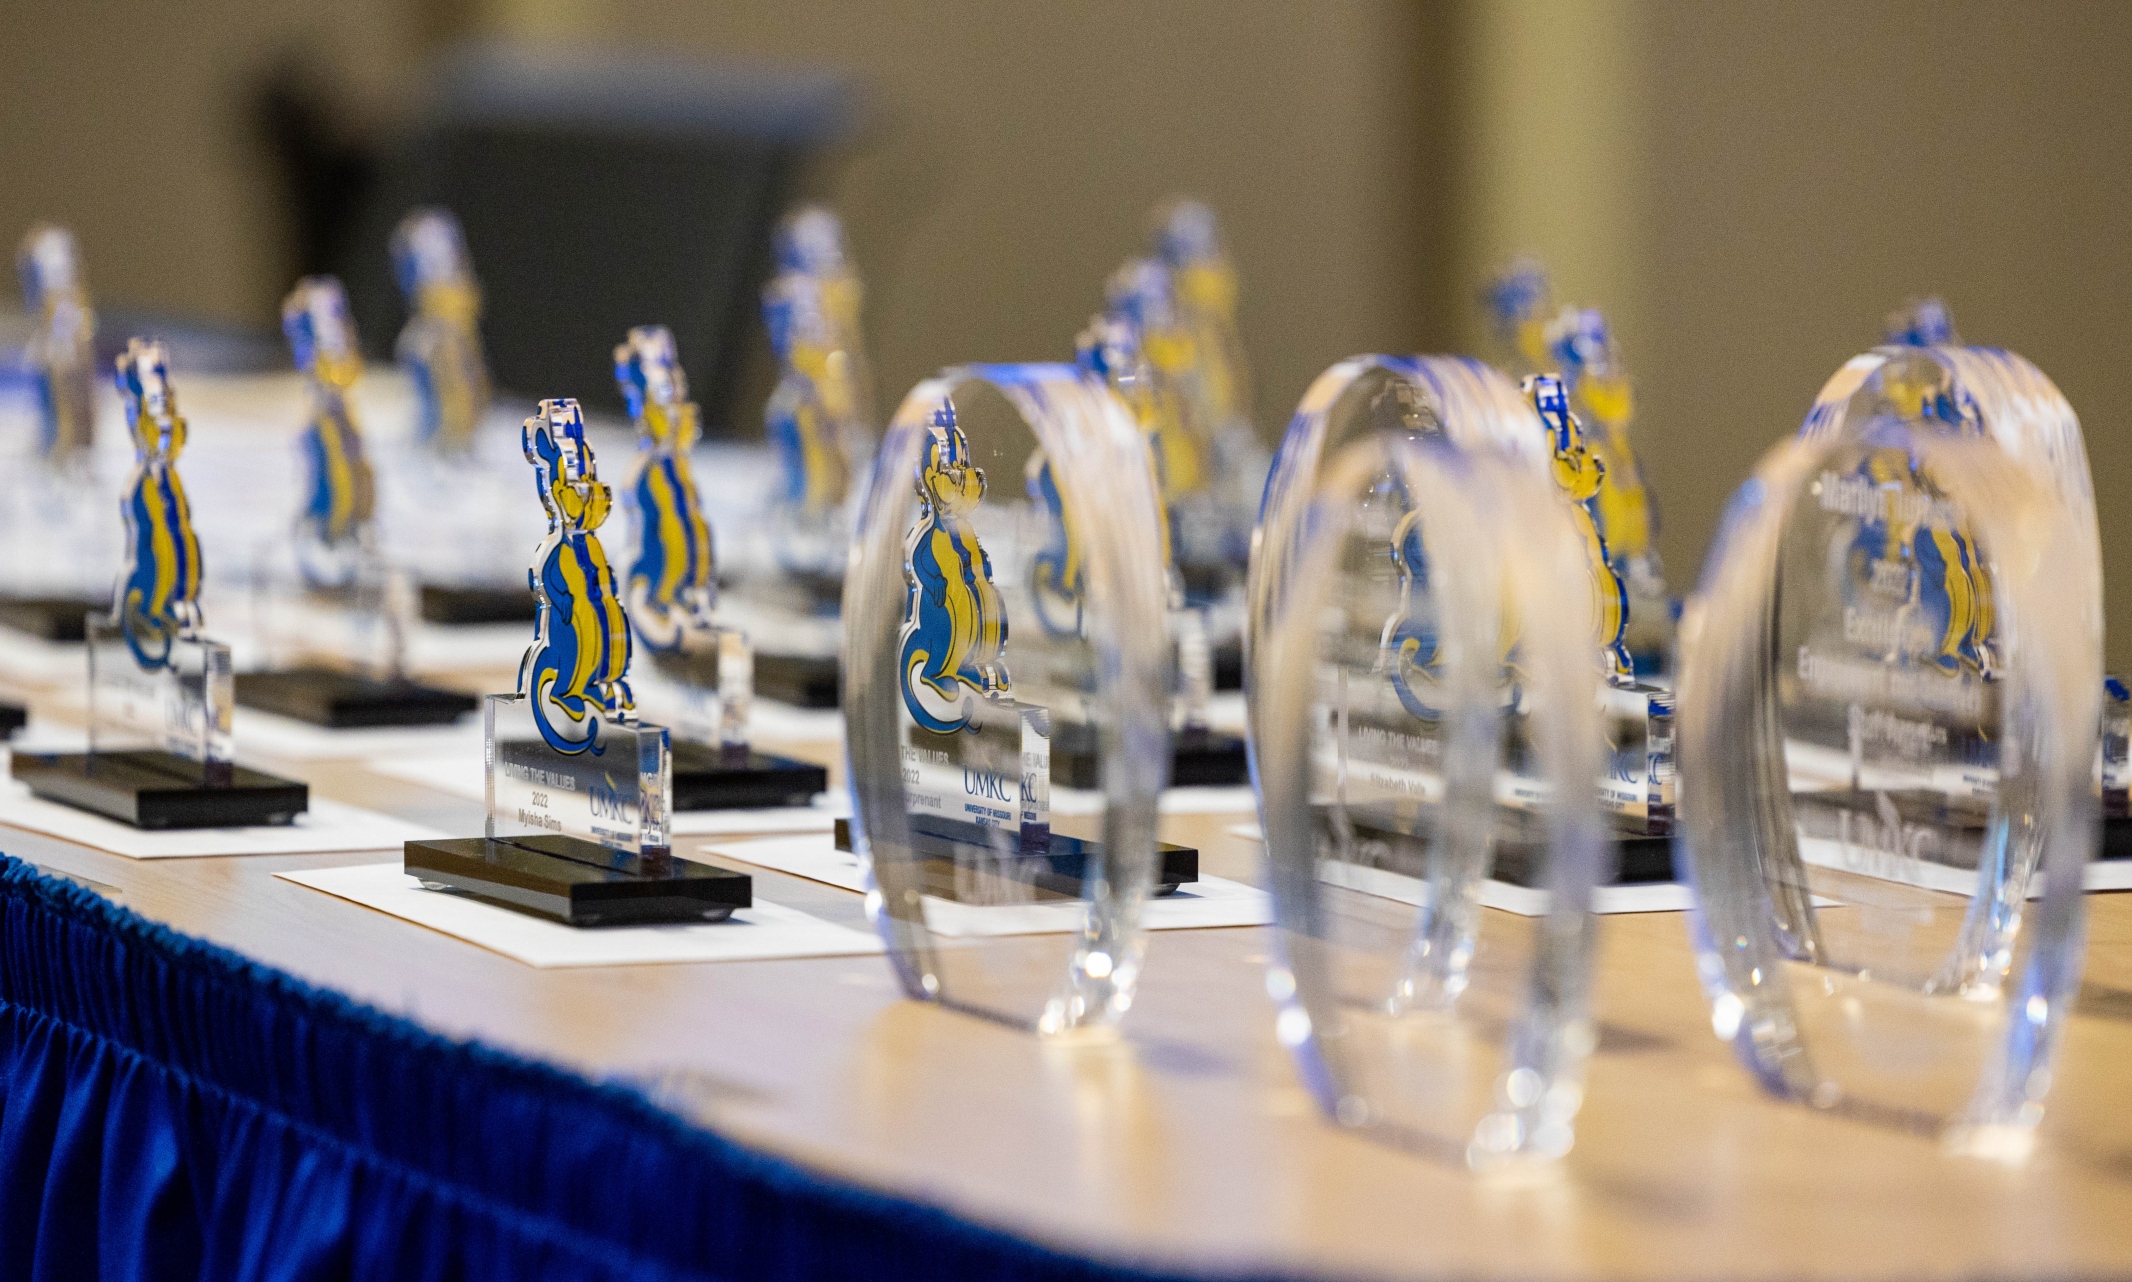 awards sit on table